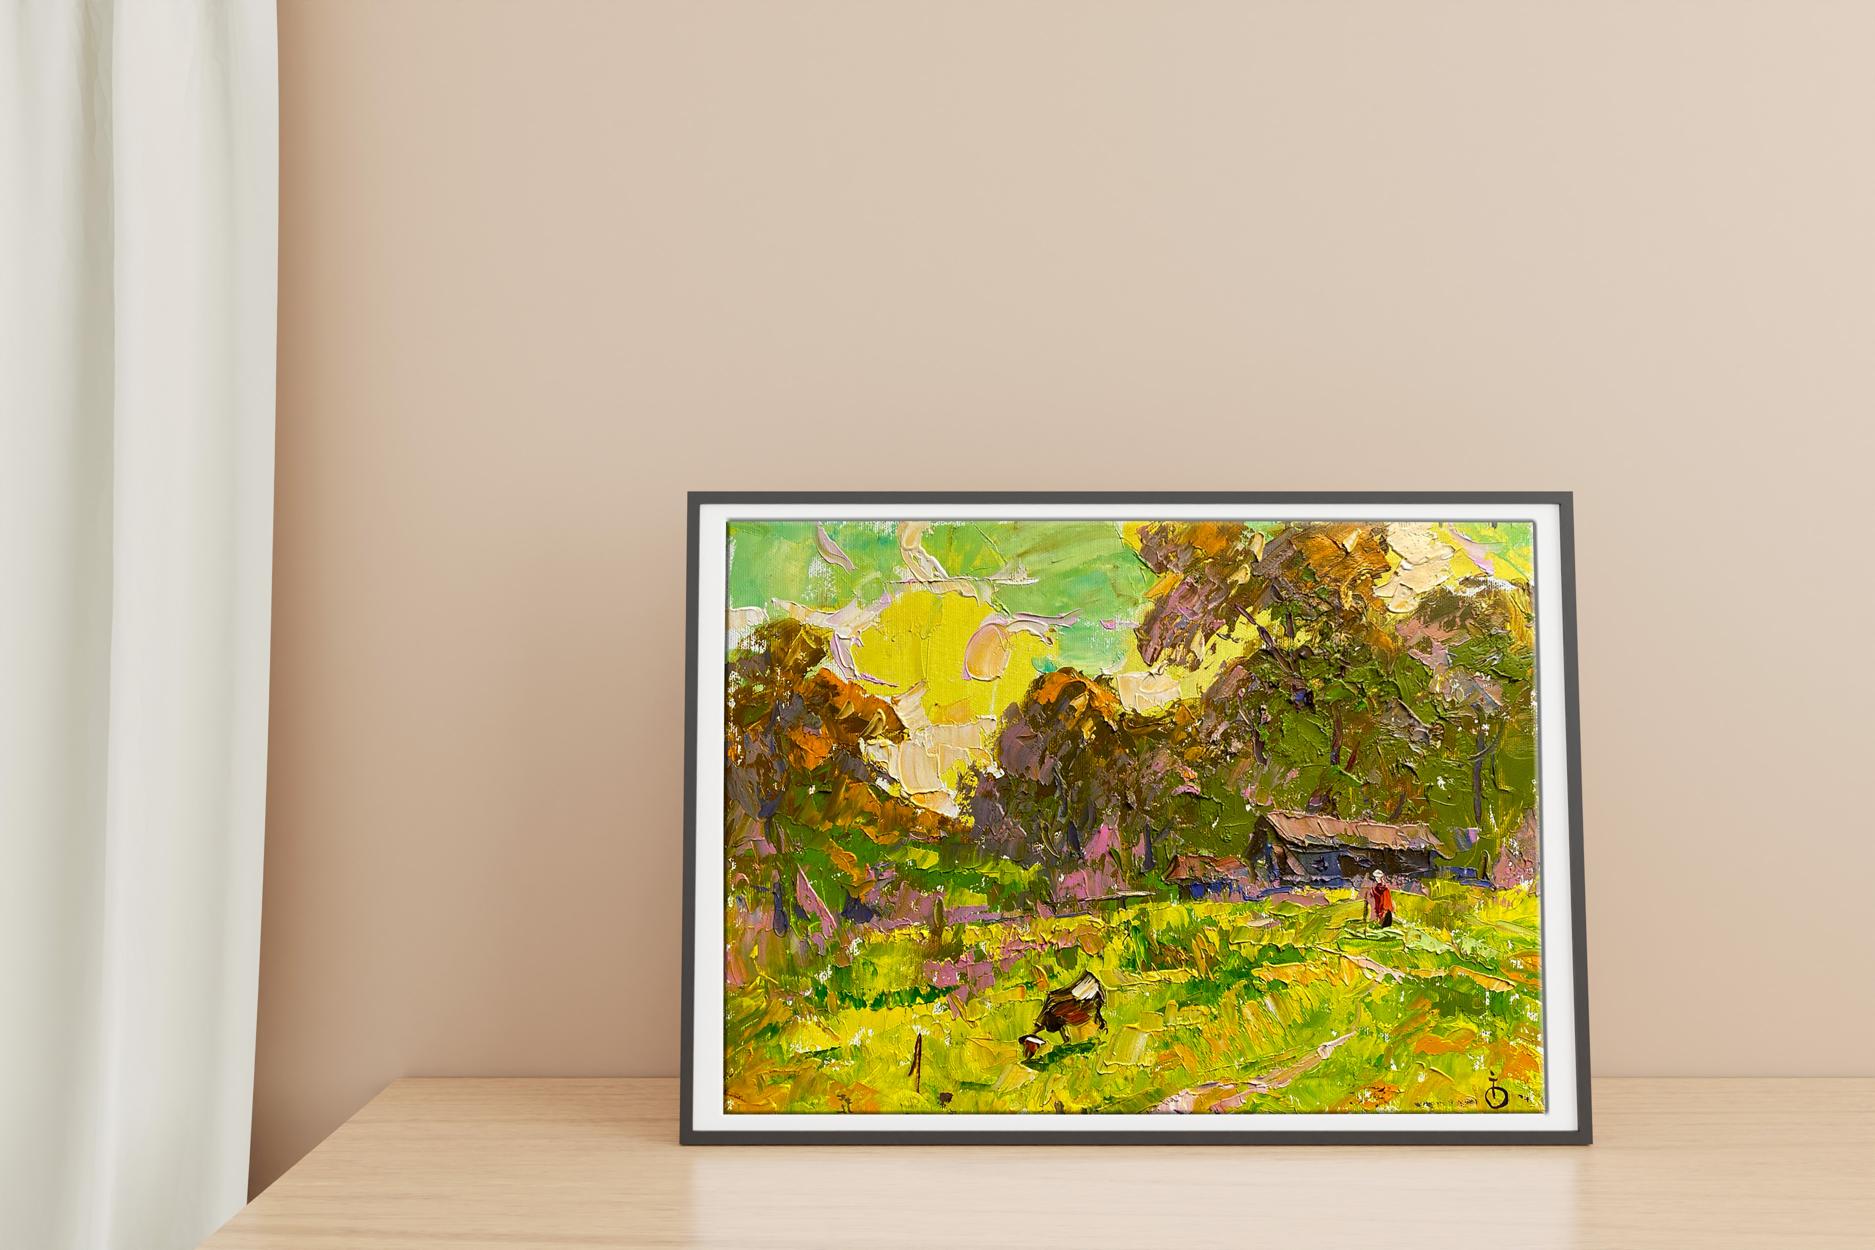 Alex Ivanyuk's "On the Pasture" oil painting featuring grazing animals and lush fields.